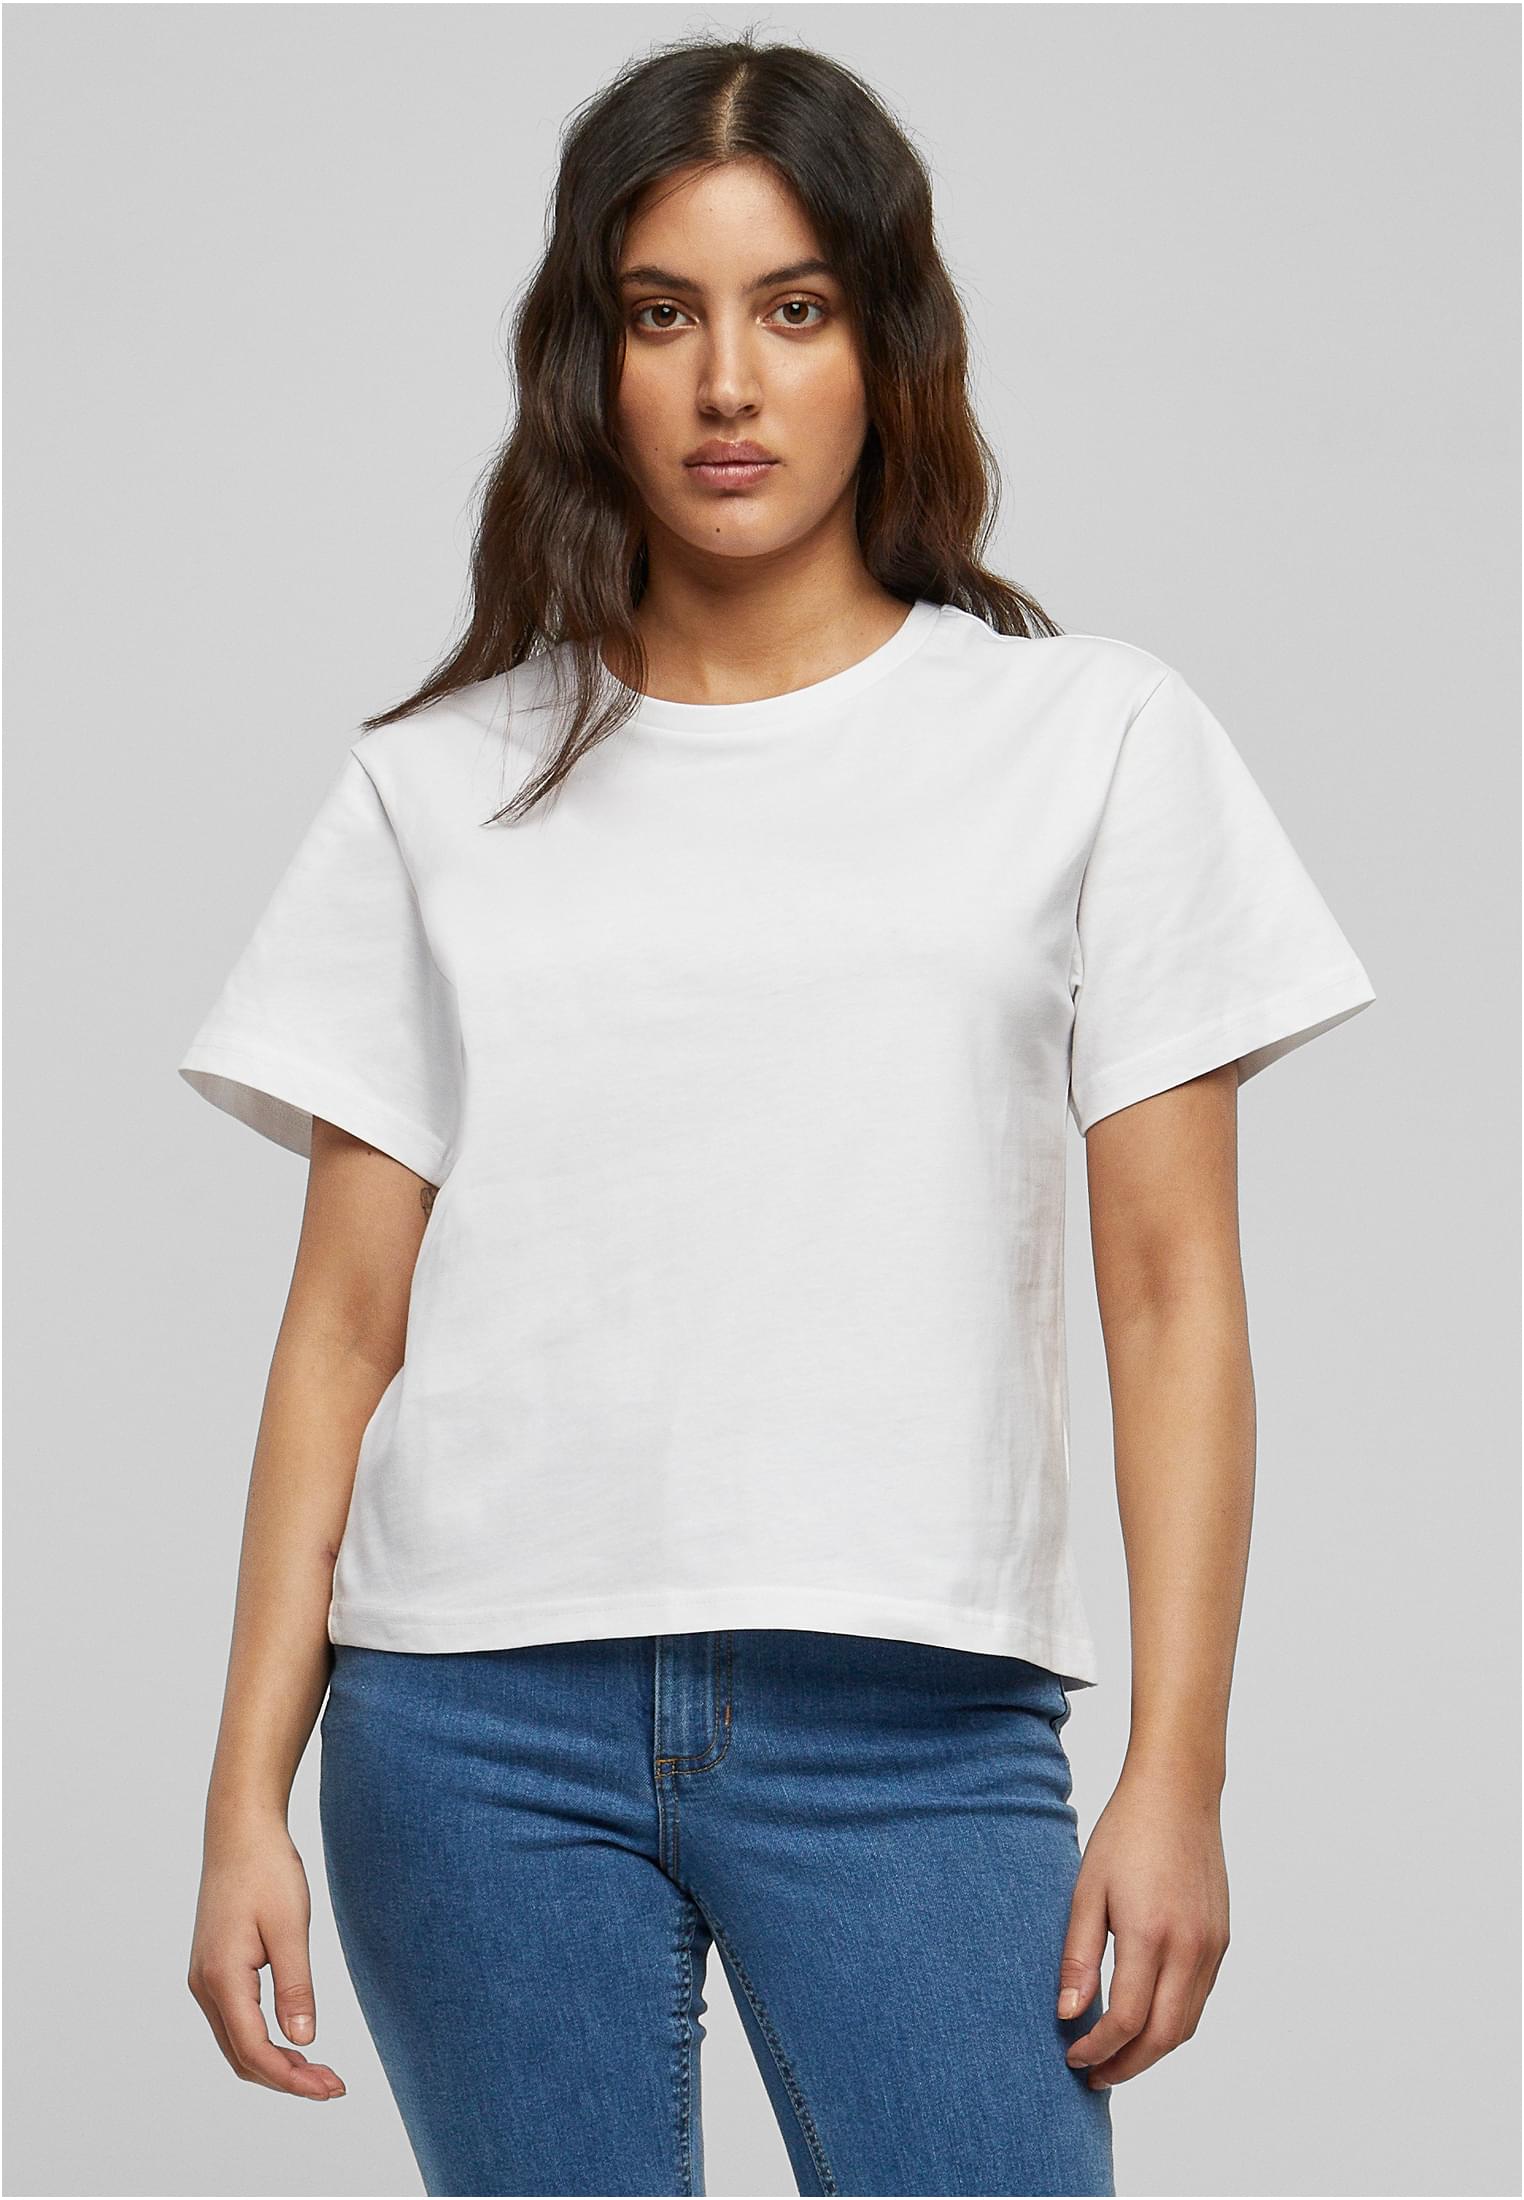 Women's T-shirt Made Of Recycled Cotton In White